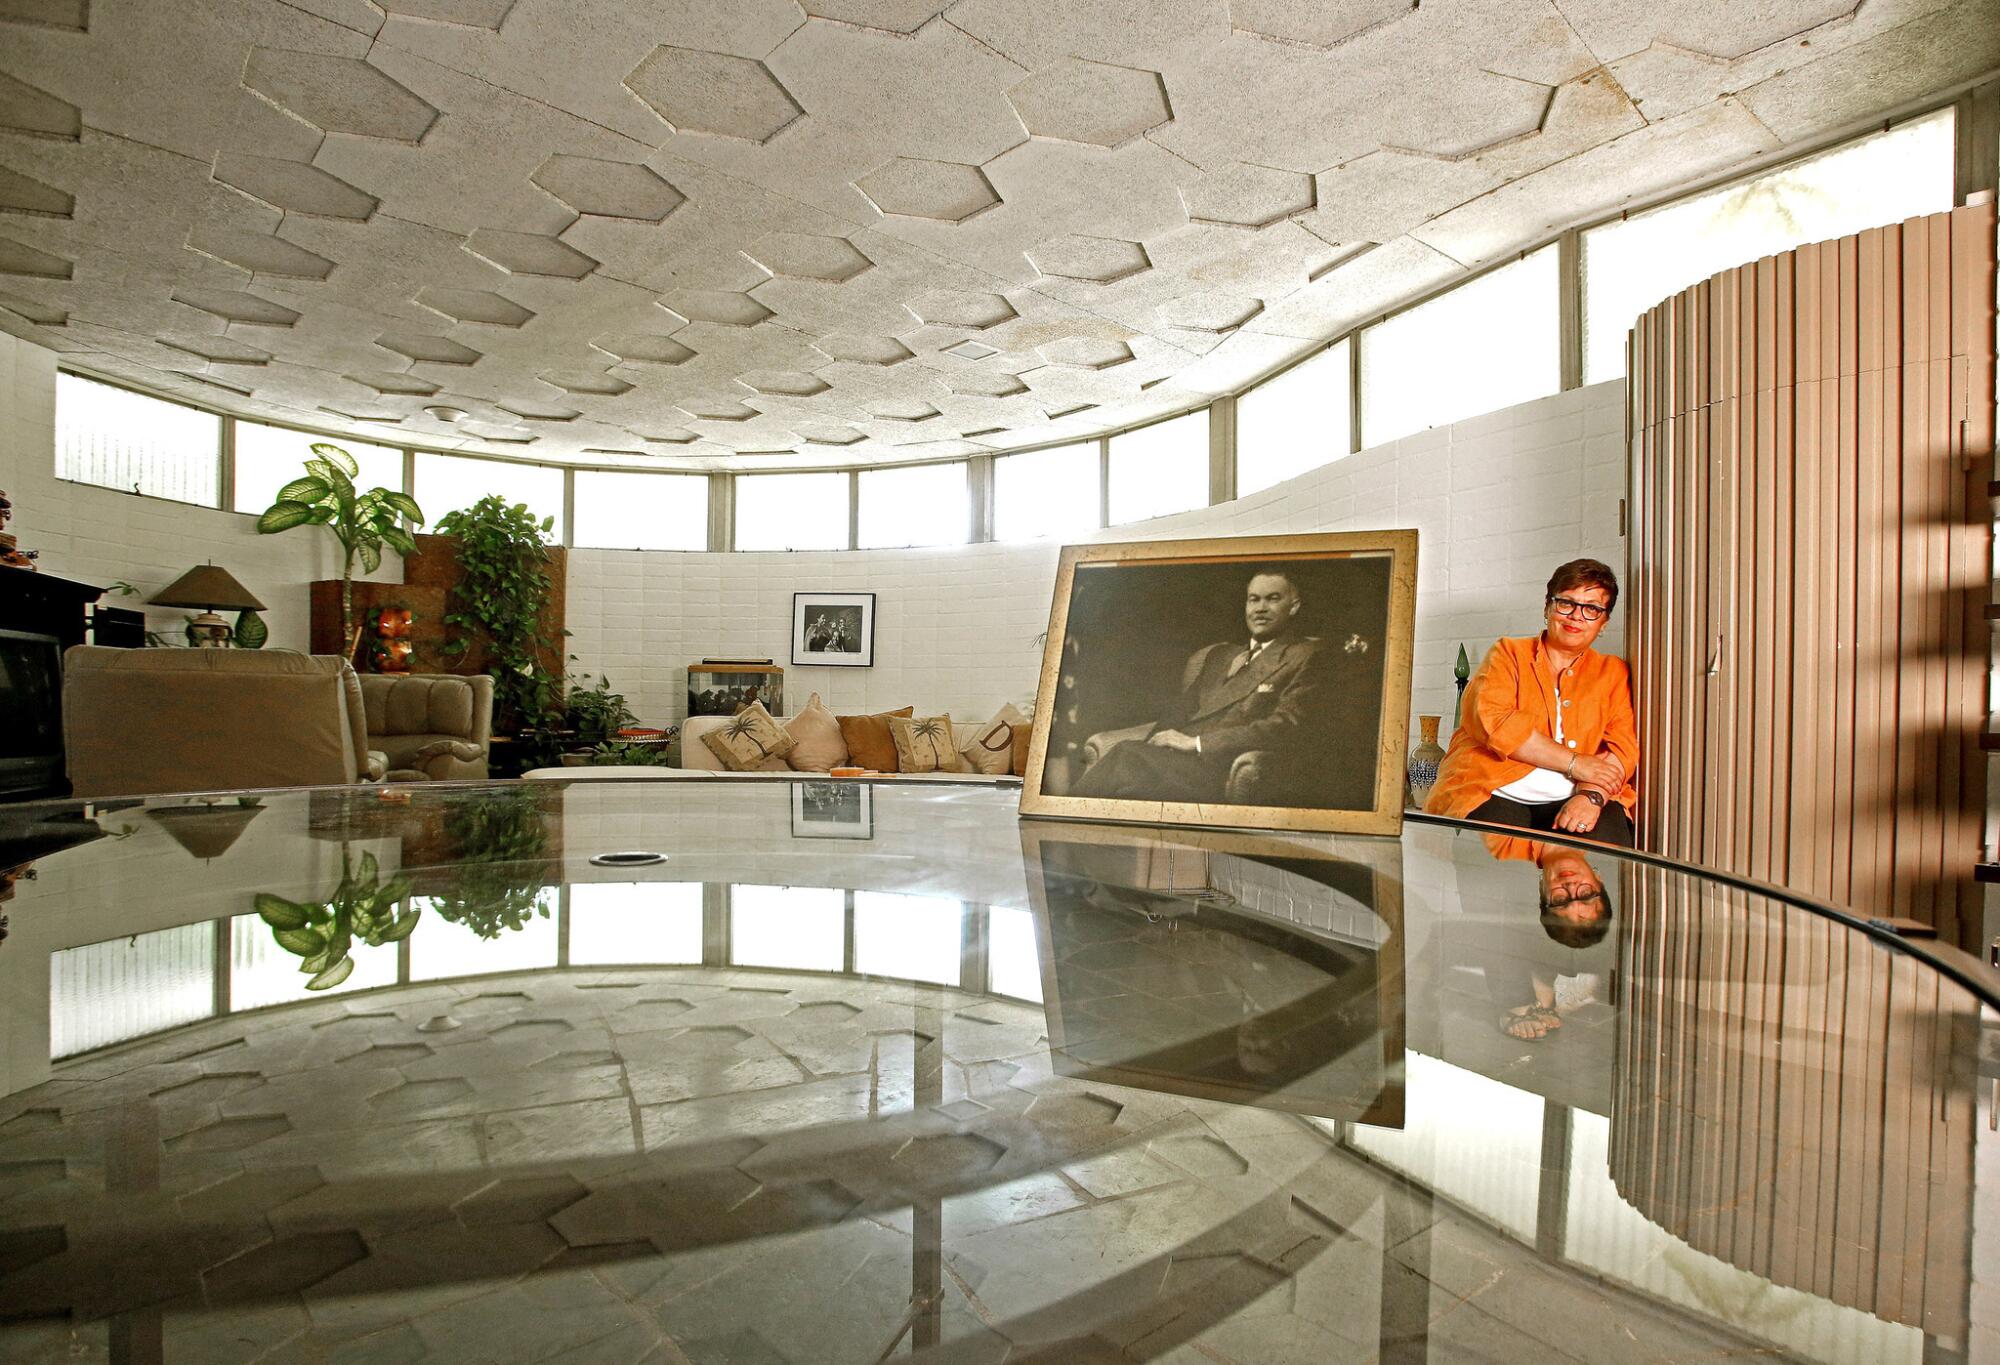 Karen Hudson sits in a curved room with a honeycomb ceiling before a photo of Paul R. Williams.